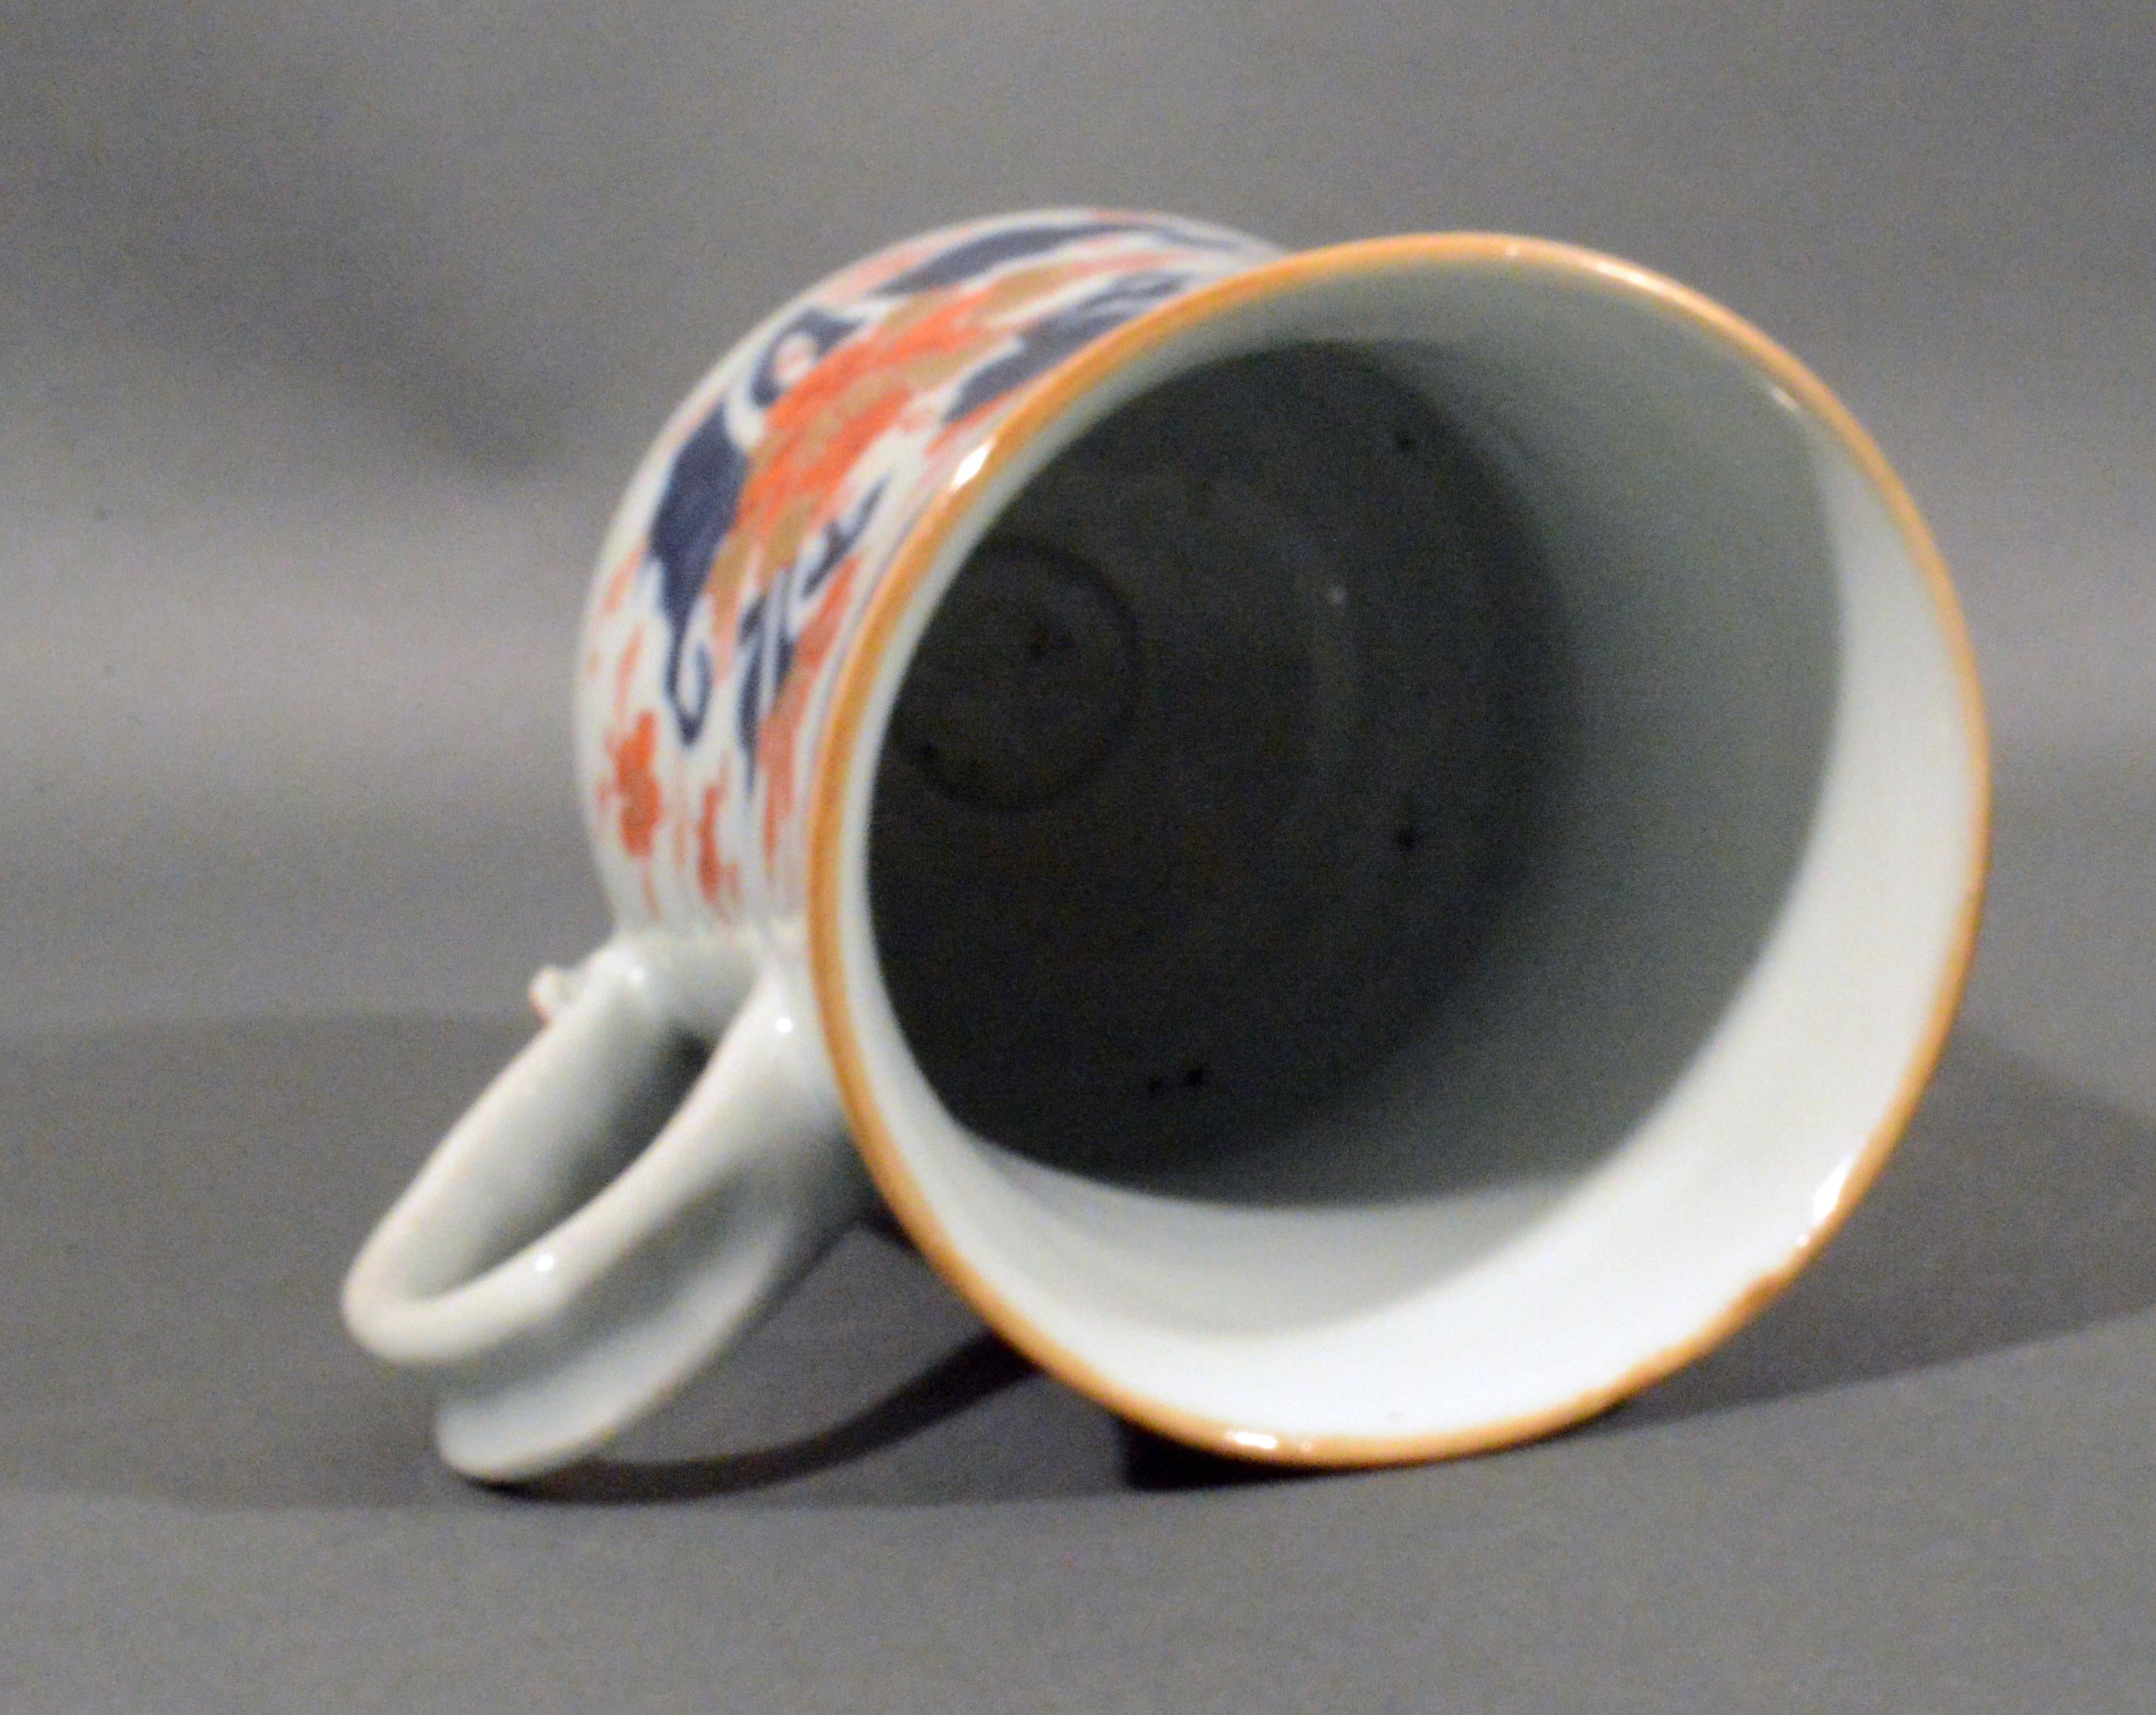 Chinese export porcelain Imari bell-shaped large tankard,
circa 1740
(Ref: NY9245-imr)

The bell-form Chinese Export Imari porcelain tankard is painted in underglaze 